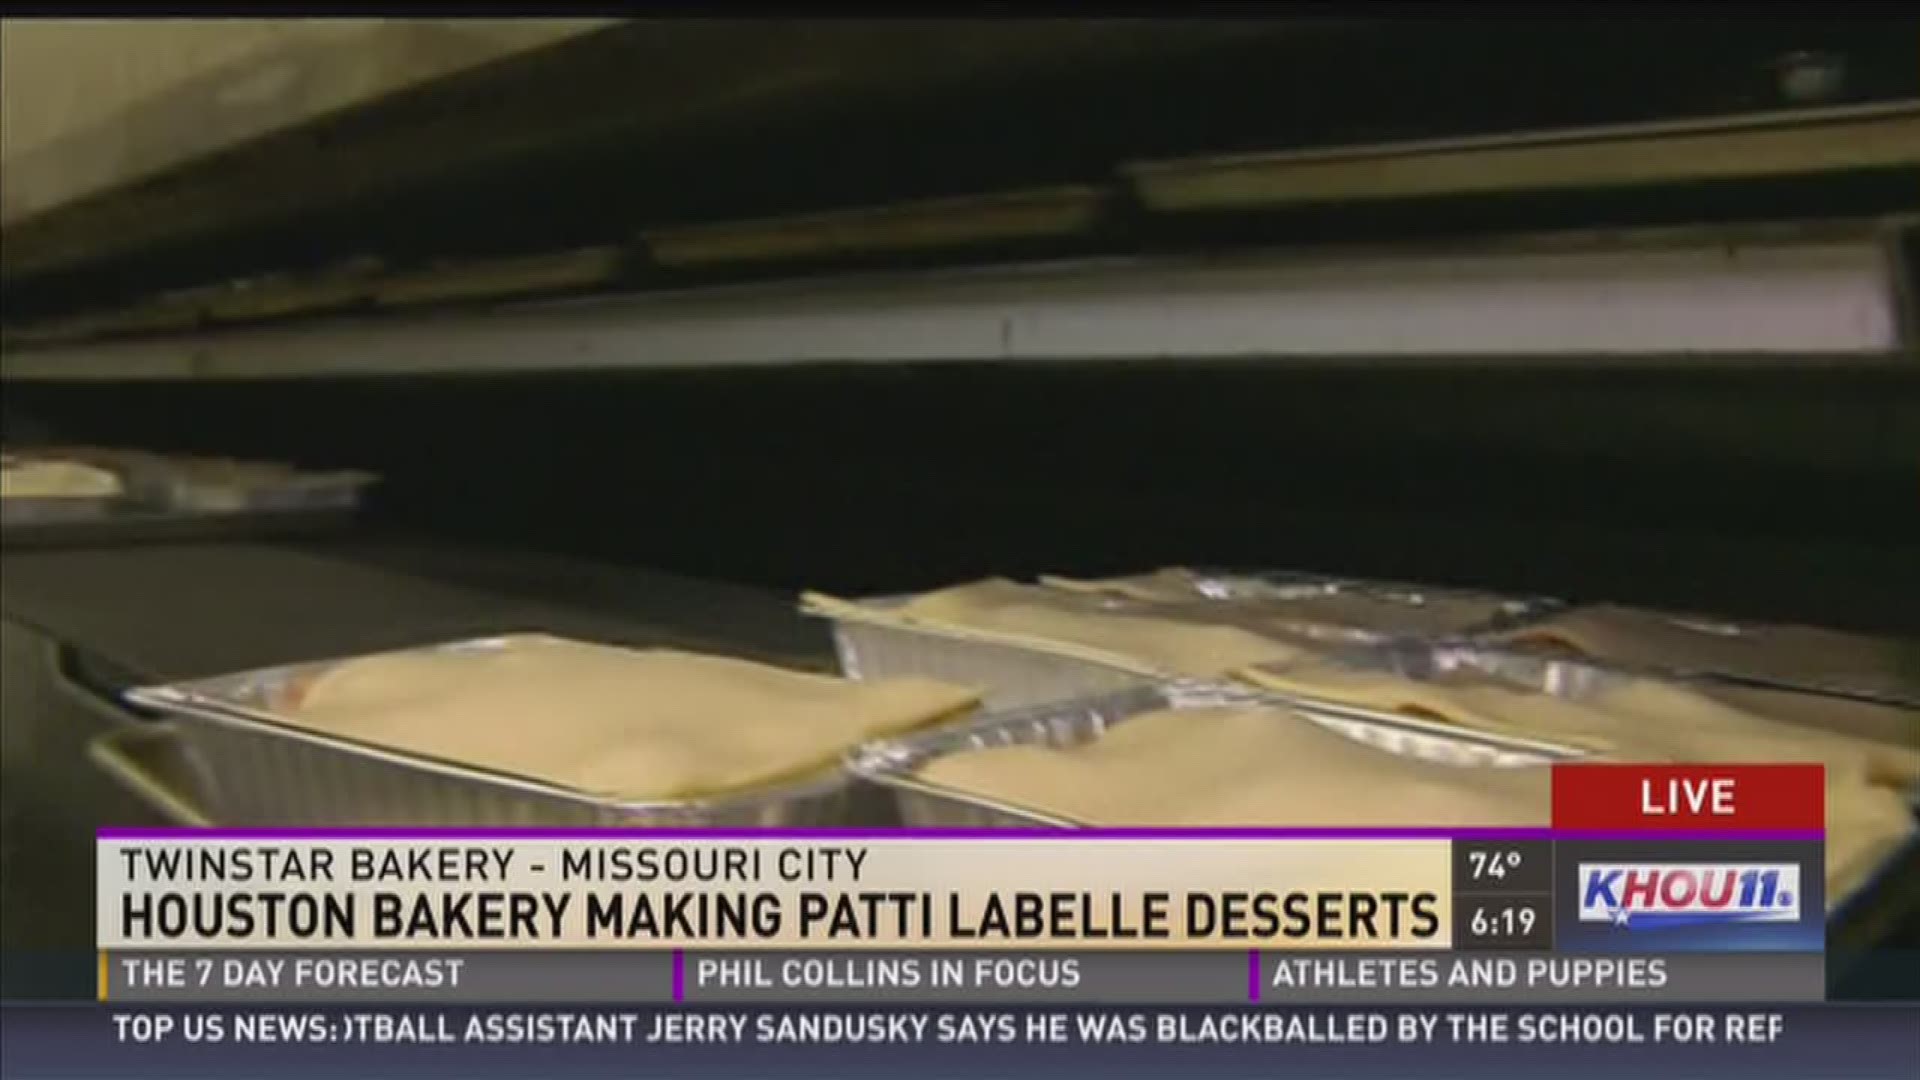 A Houston bakery is making Patty LaBelle desserts for Walmart.